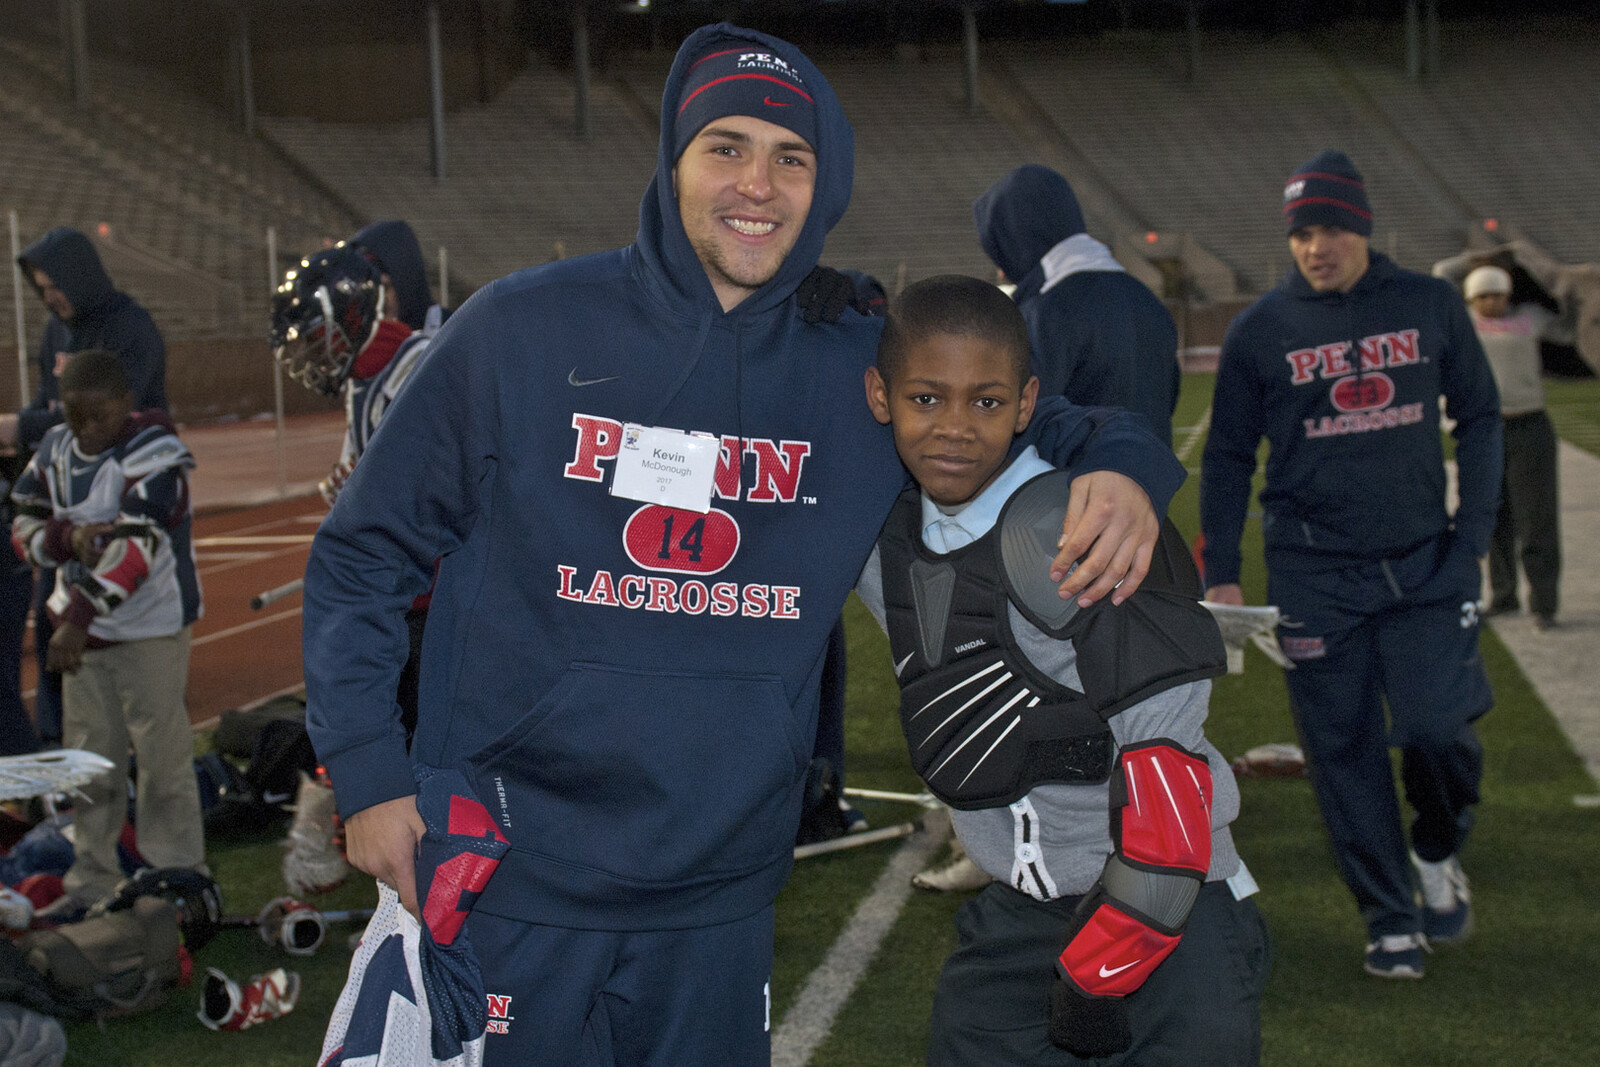 Penn Lacrosse player with younger player